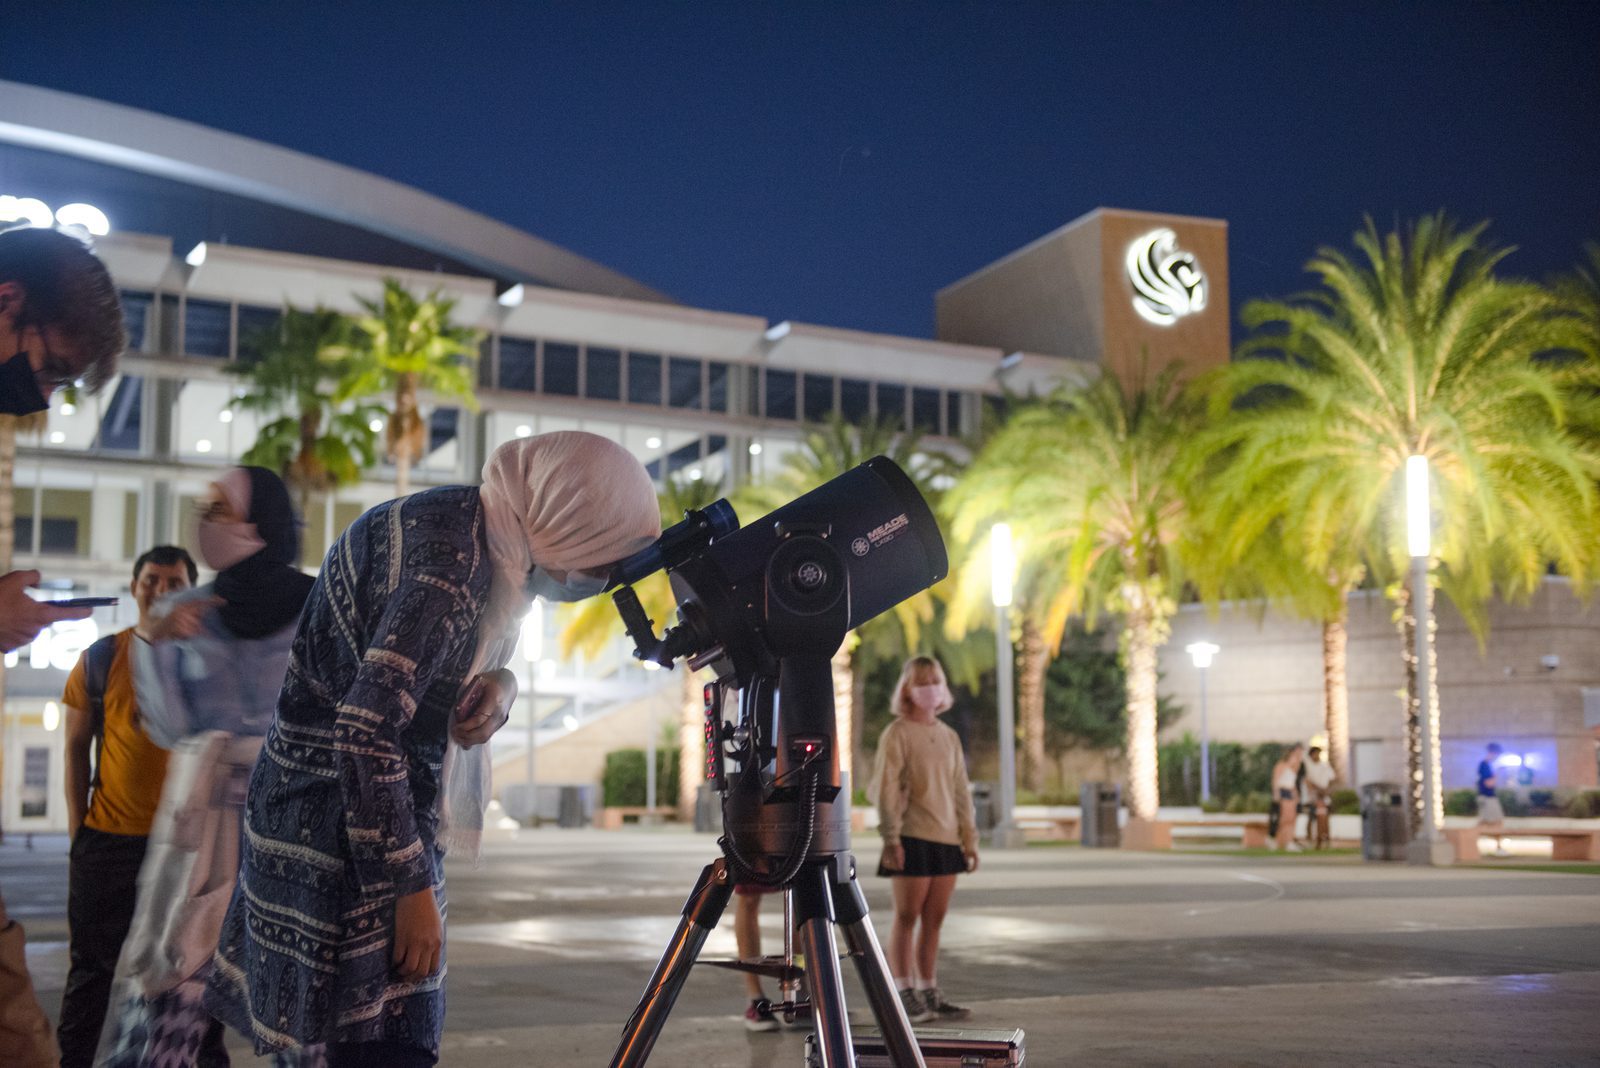 Graduate students observe the Moon at the International Observe the Moon Night event at UCF's Memory Mall